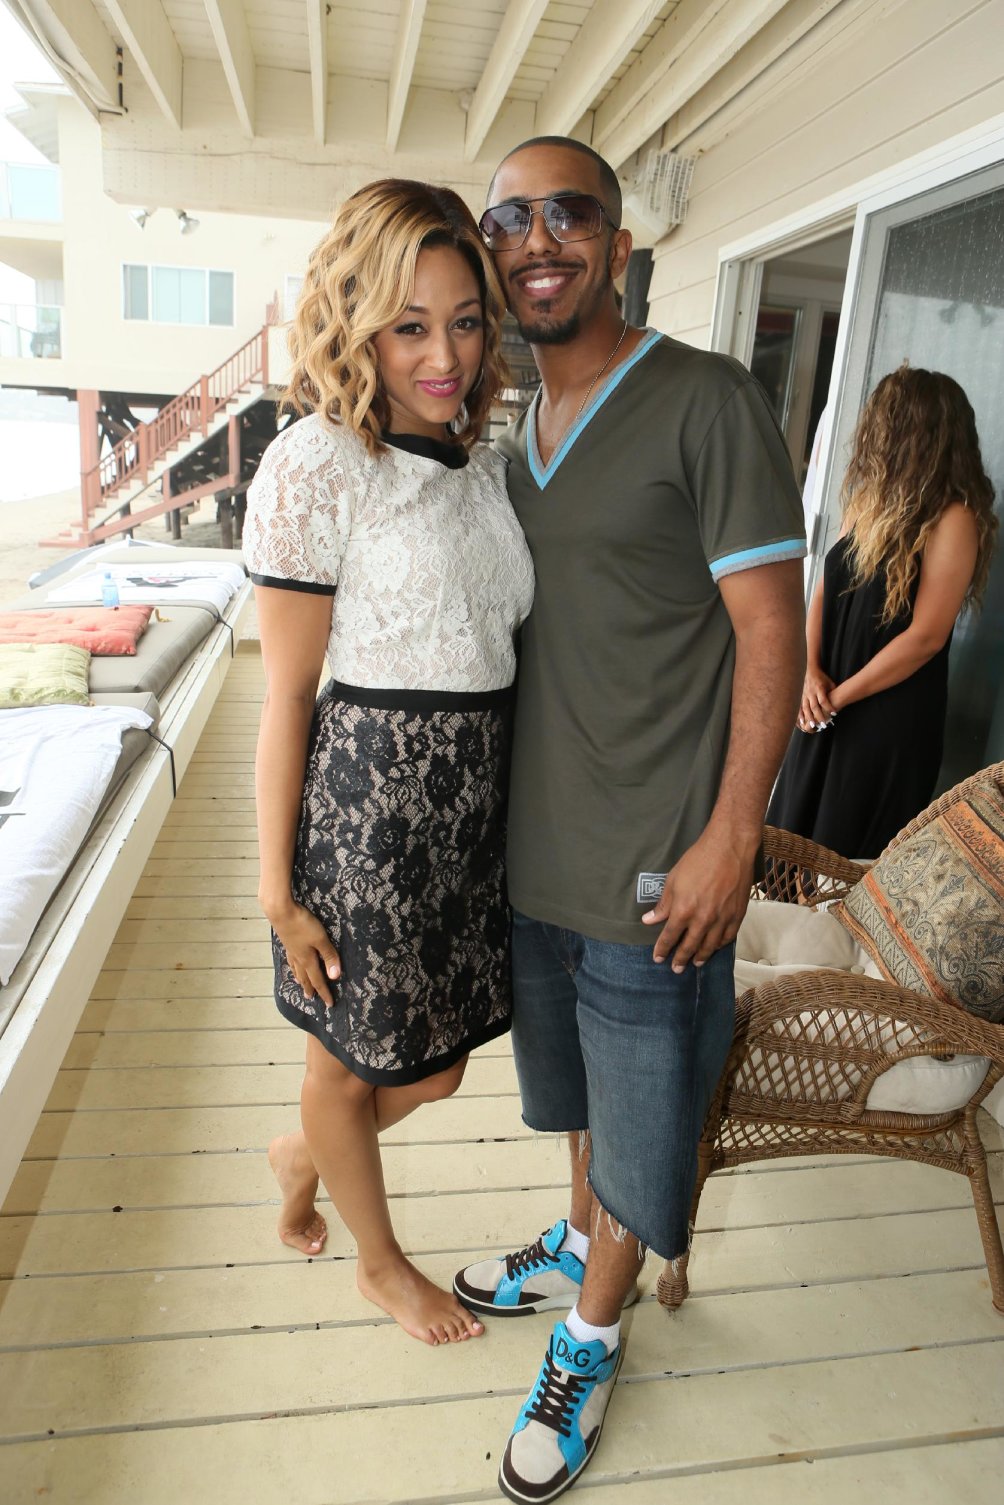 Tia Mowry and Marques Houston celebrate Tia Mowry's 35th birthday at the LYFE Kitchen Beach House powered by KIA on Sunday July 21, 2013 in Malibu, CA. (Photo by Alexandra Wyman/Invision for Talent Resources/AP Images)